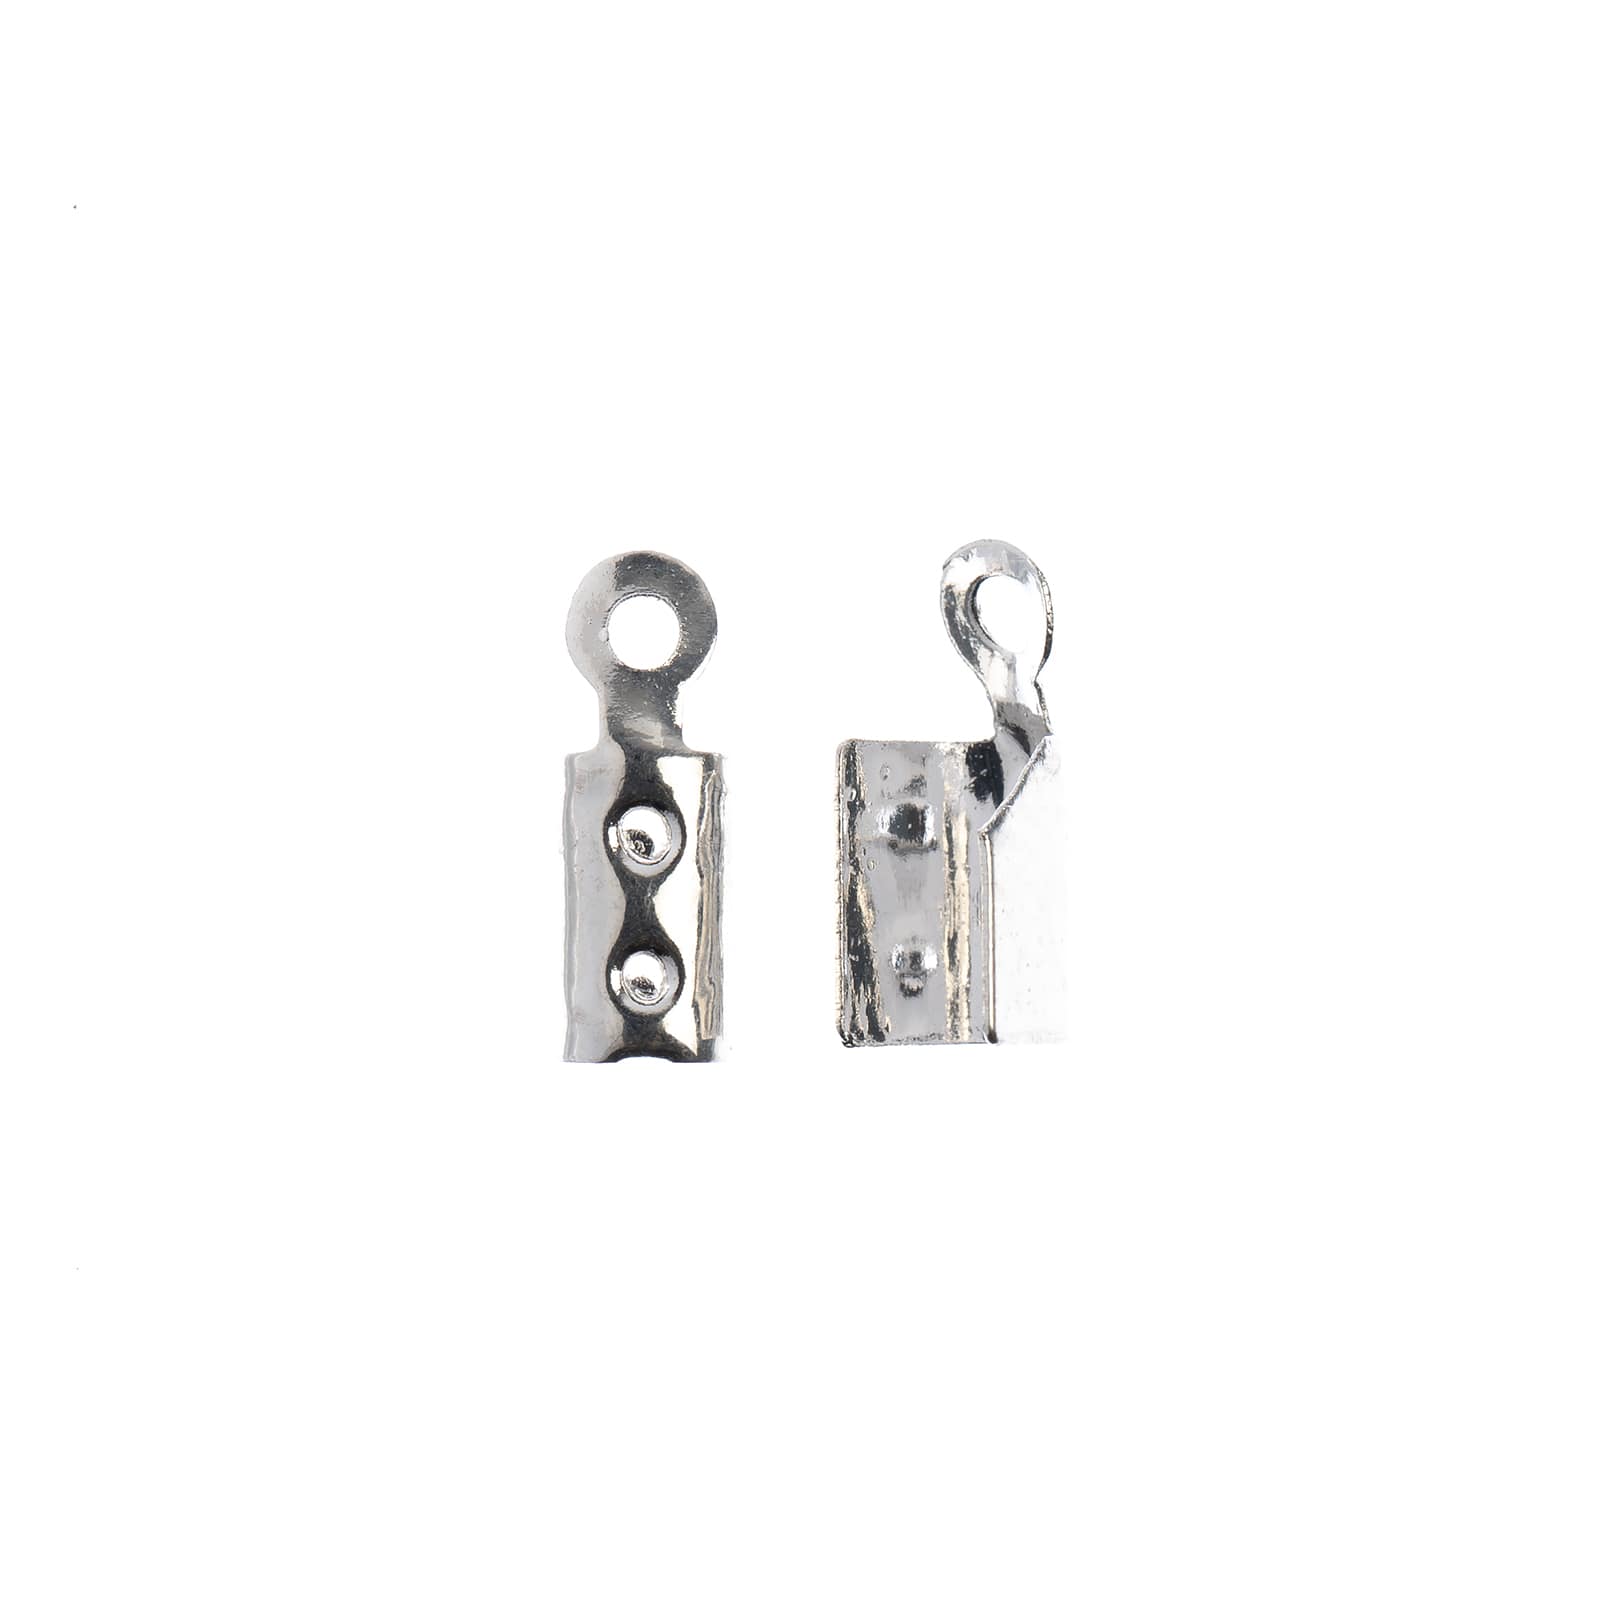 John Bead 10mm Silver Fold Over Cord Ends, 32ct.